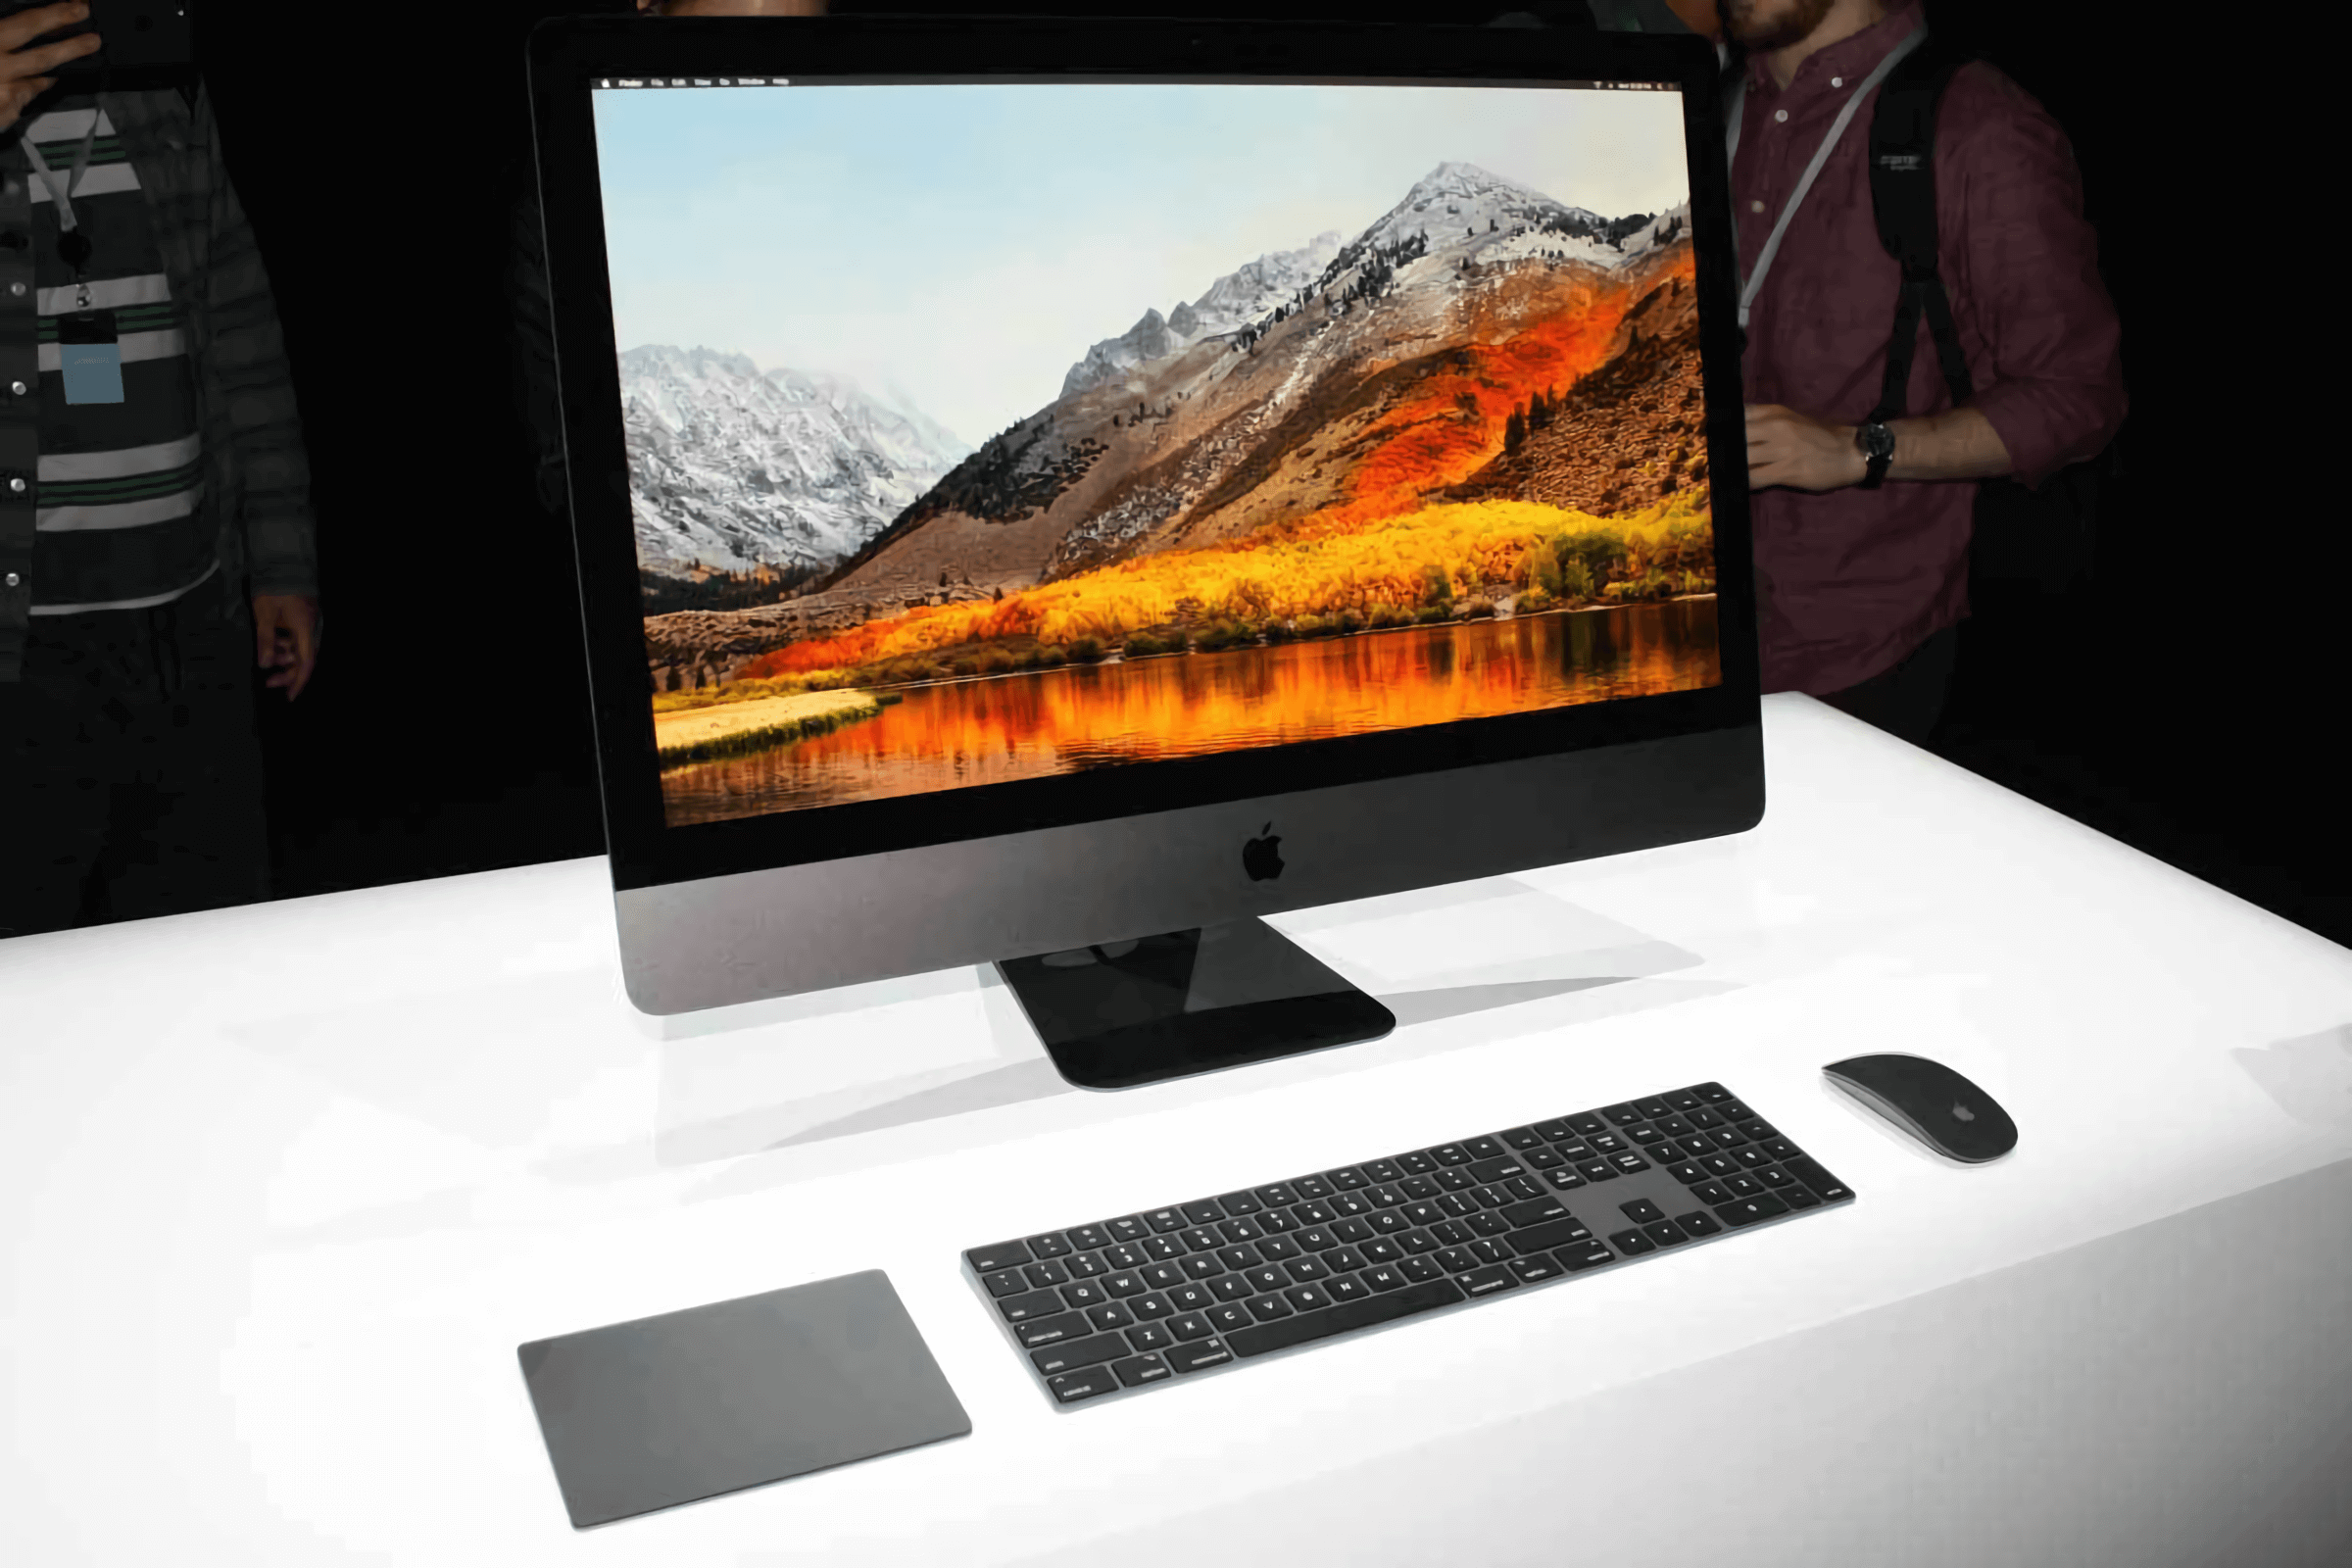 Low supply of Apple iMacs may signal impending redesign